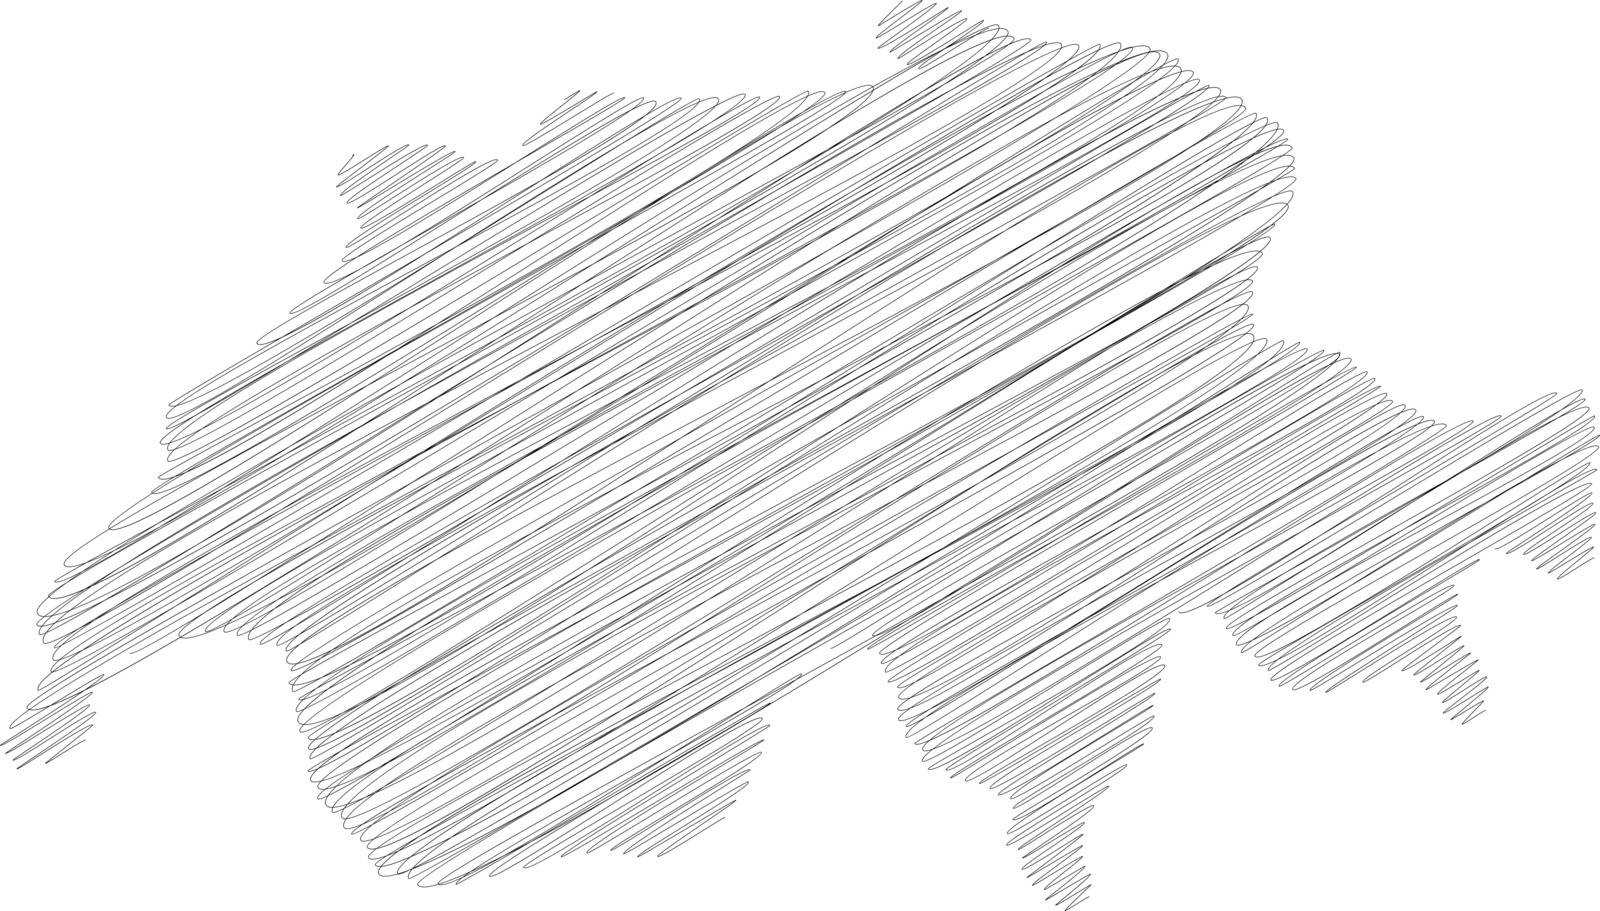 Switzerland - pencil scribble sketch silhouette map of country area with dropped shadow. Simple flat vector illustration.